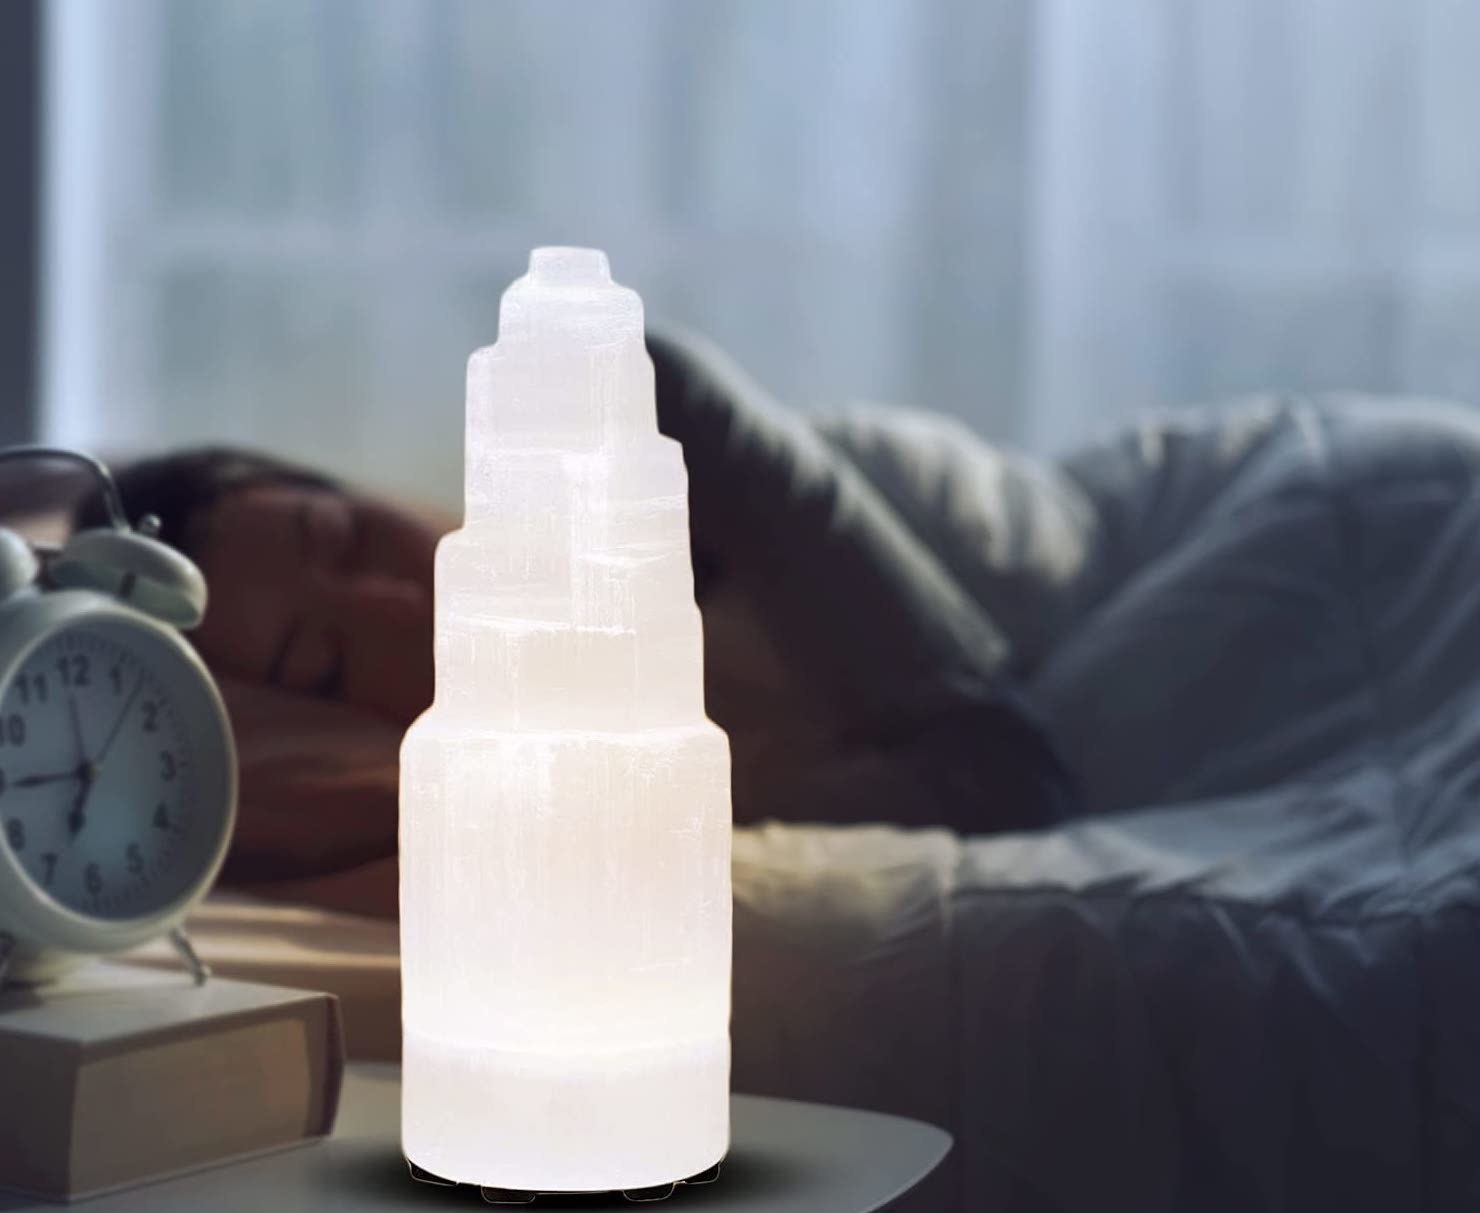 A selenite lamp on a bedside table in front of a person sleeping